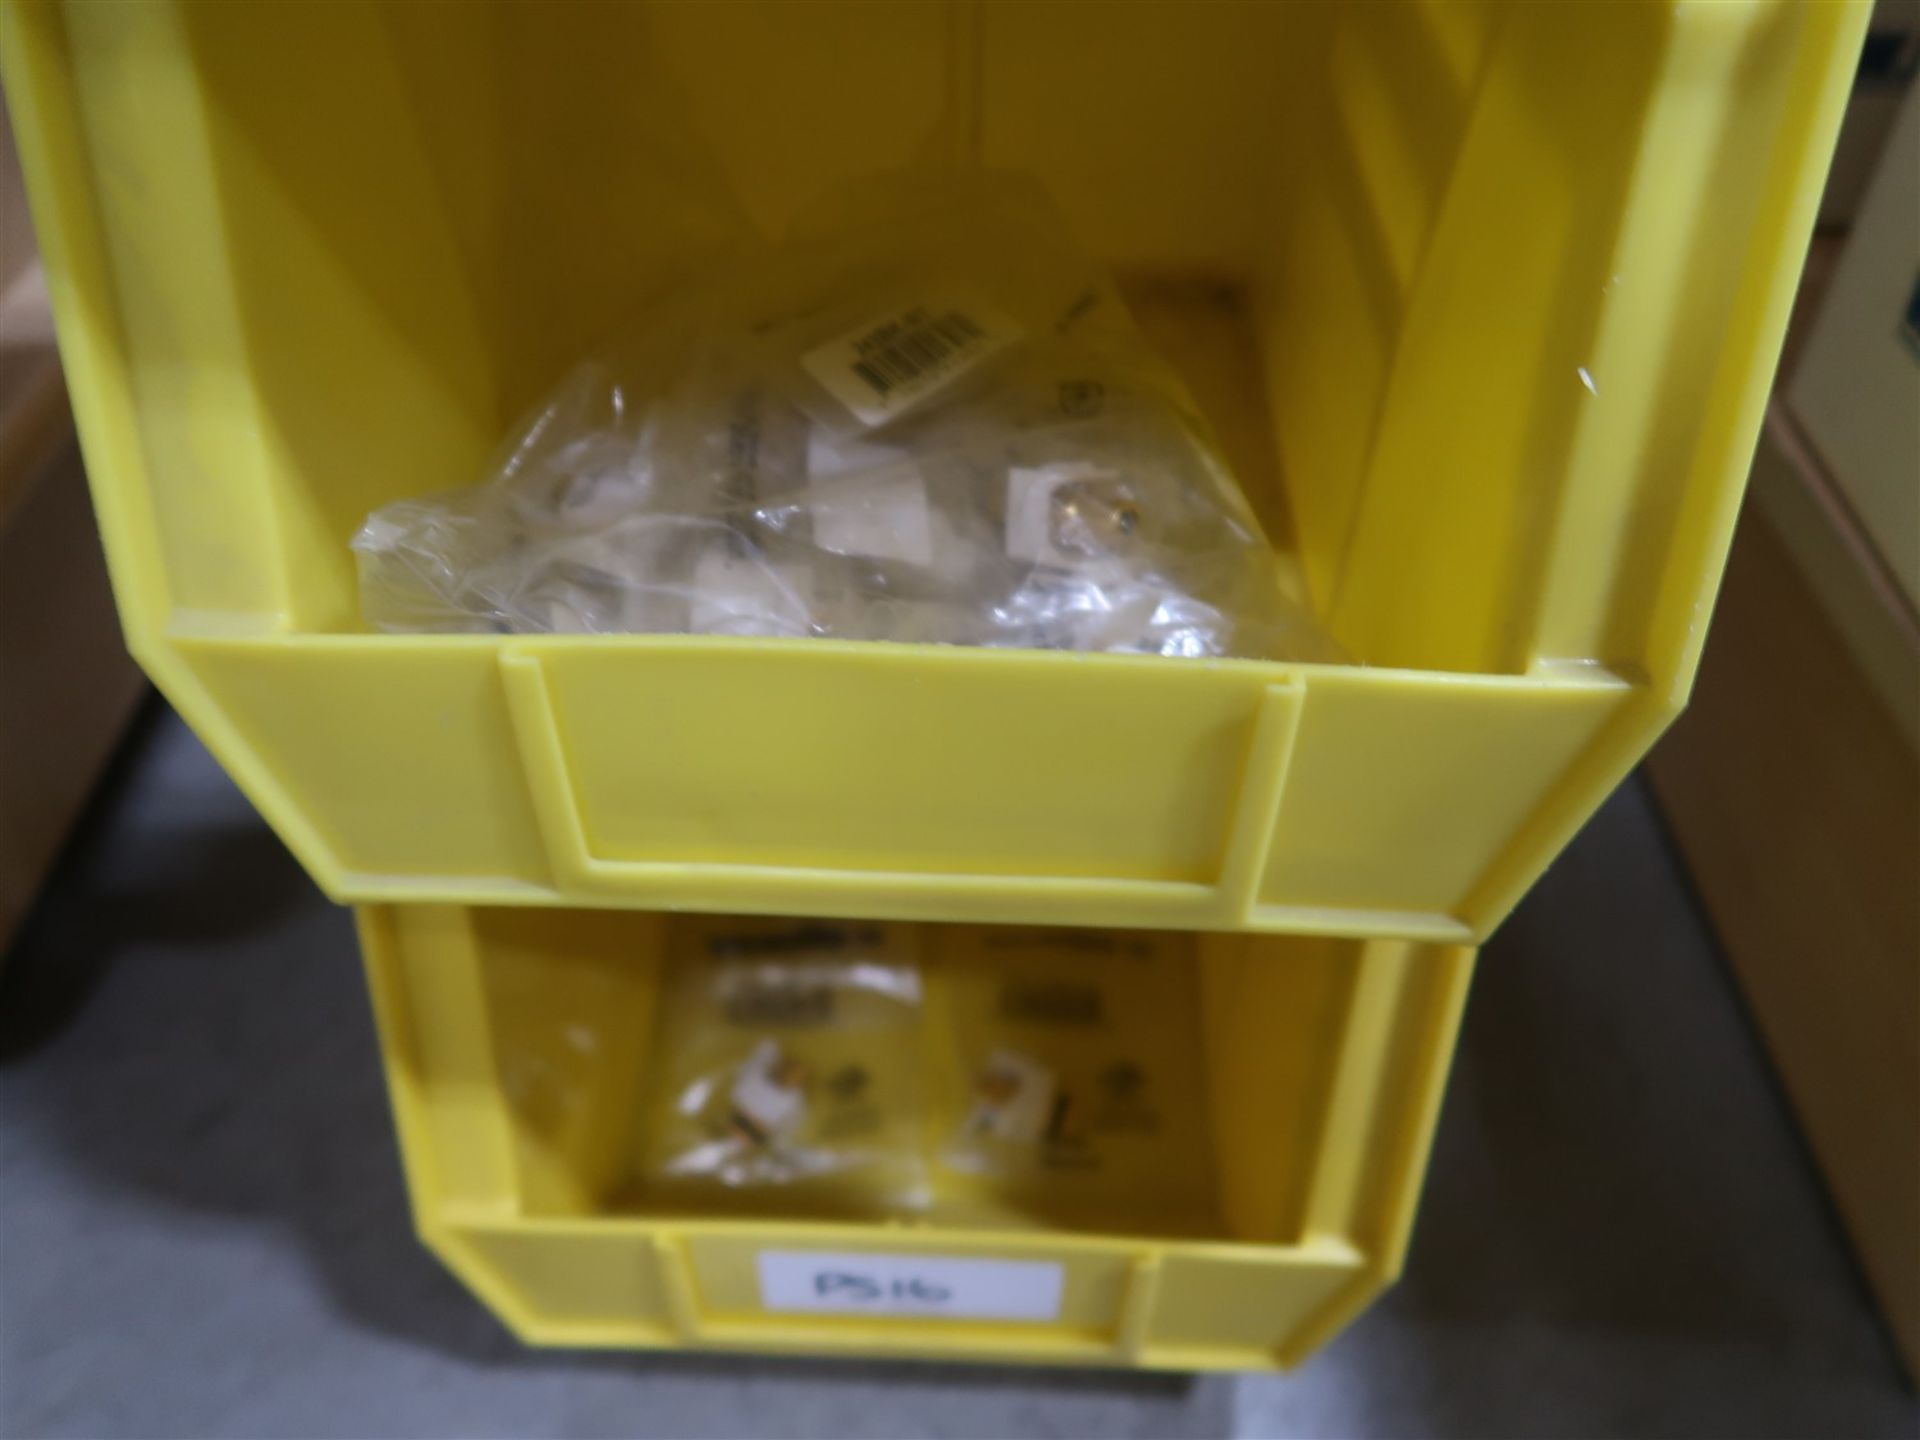 YELLOW BINS W/ASSORTED COAX INSERTS, CAT5 AND CAT6 JACKS - Image 5 of 5